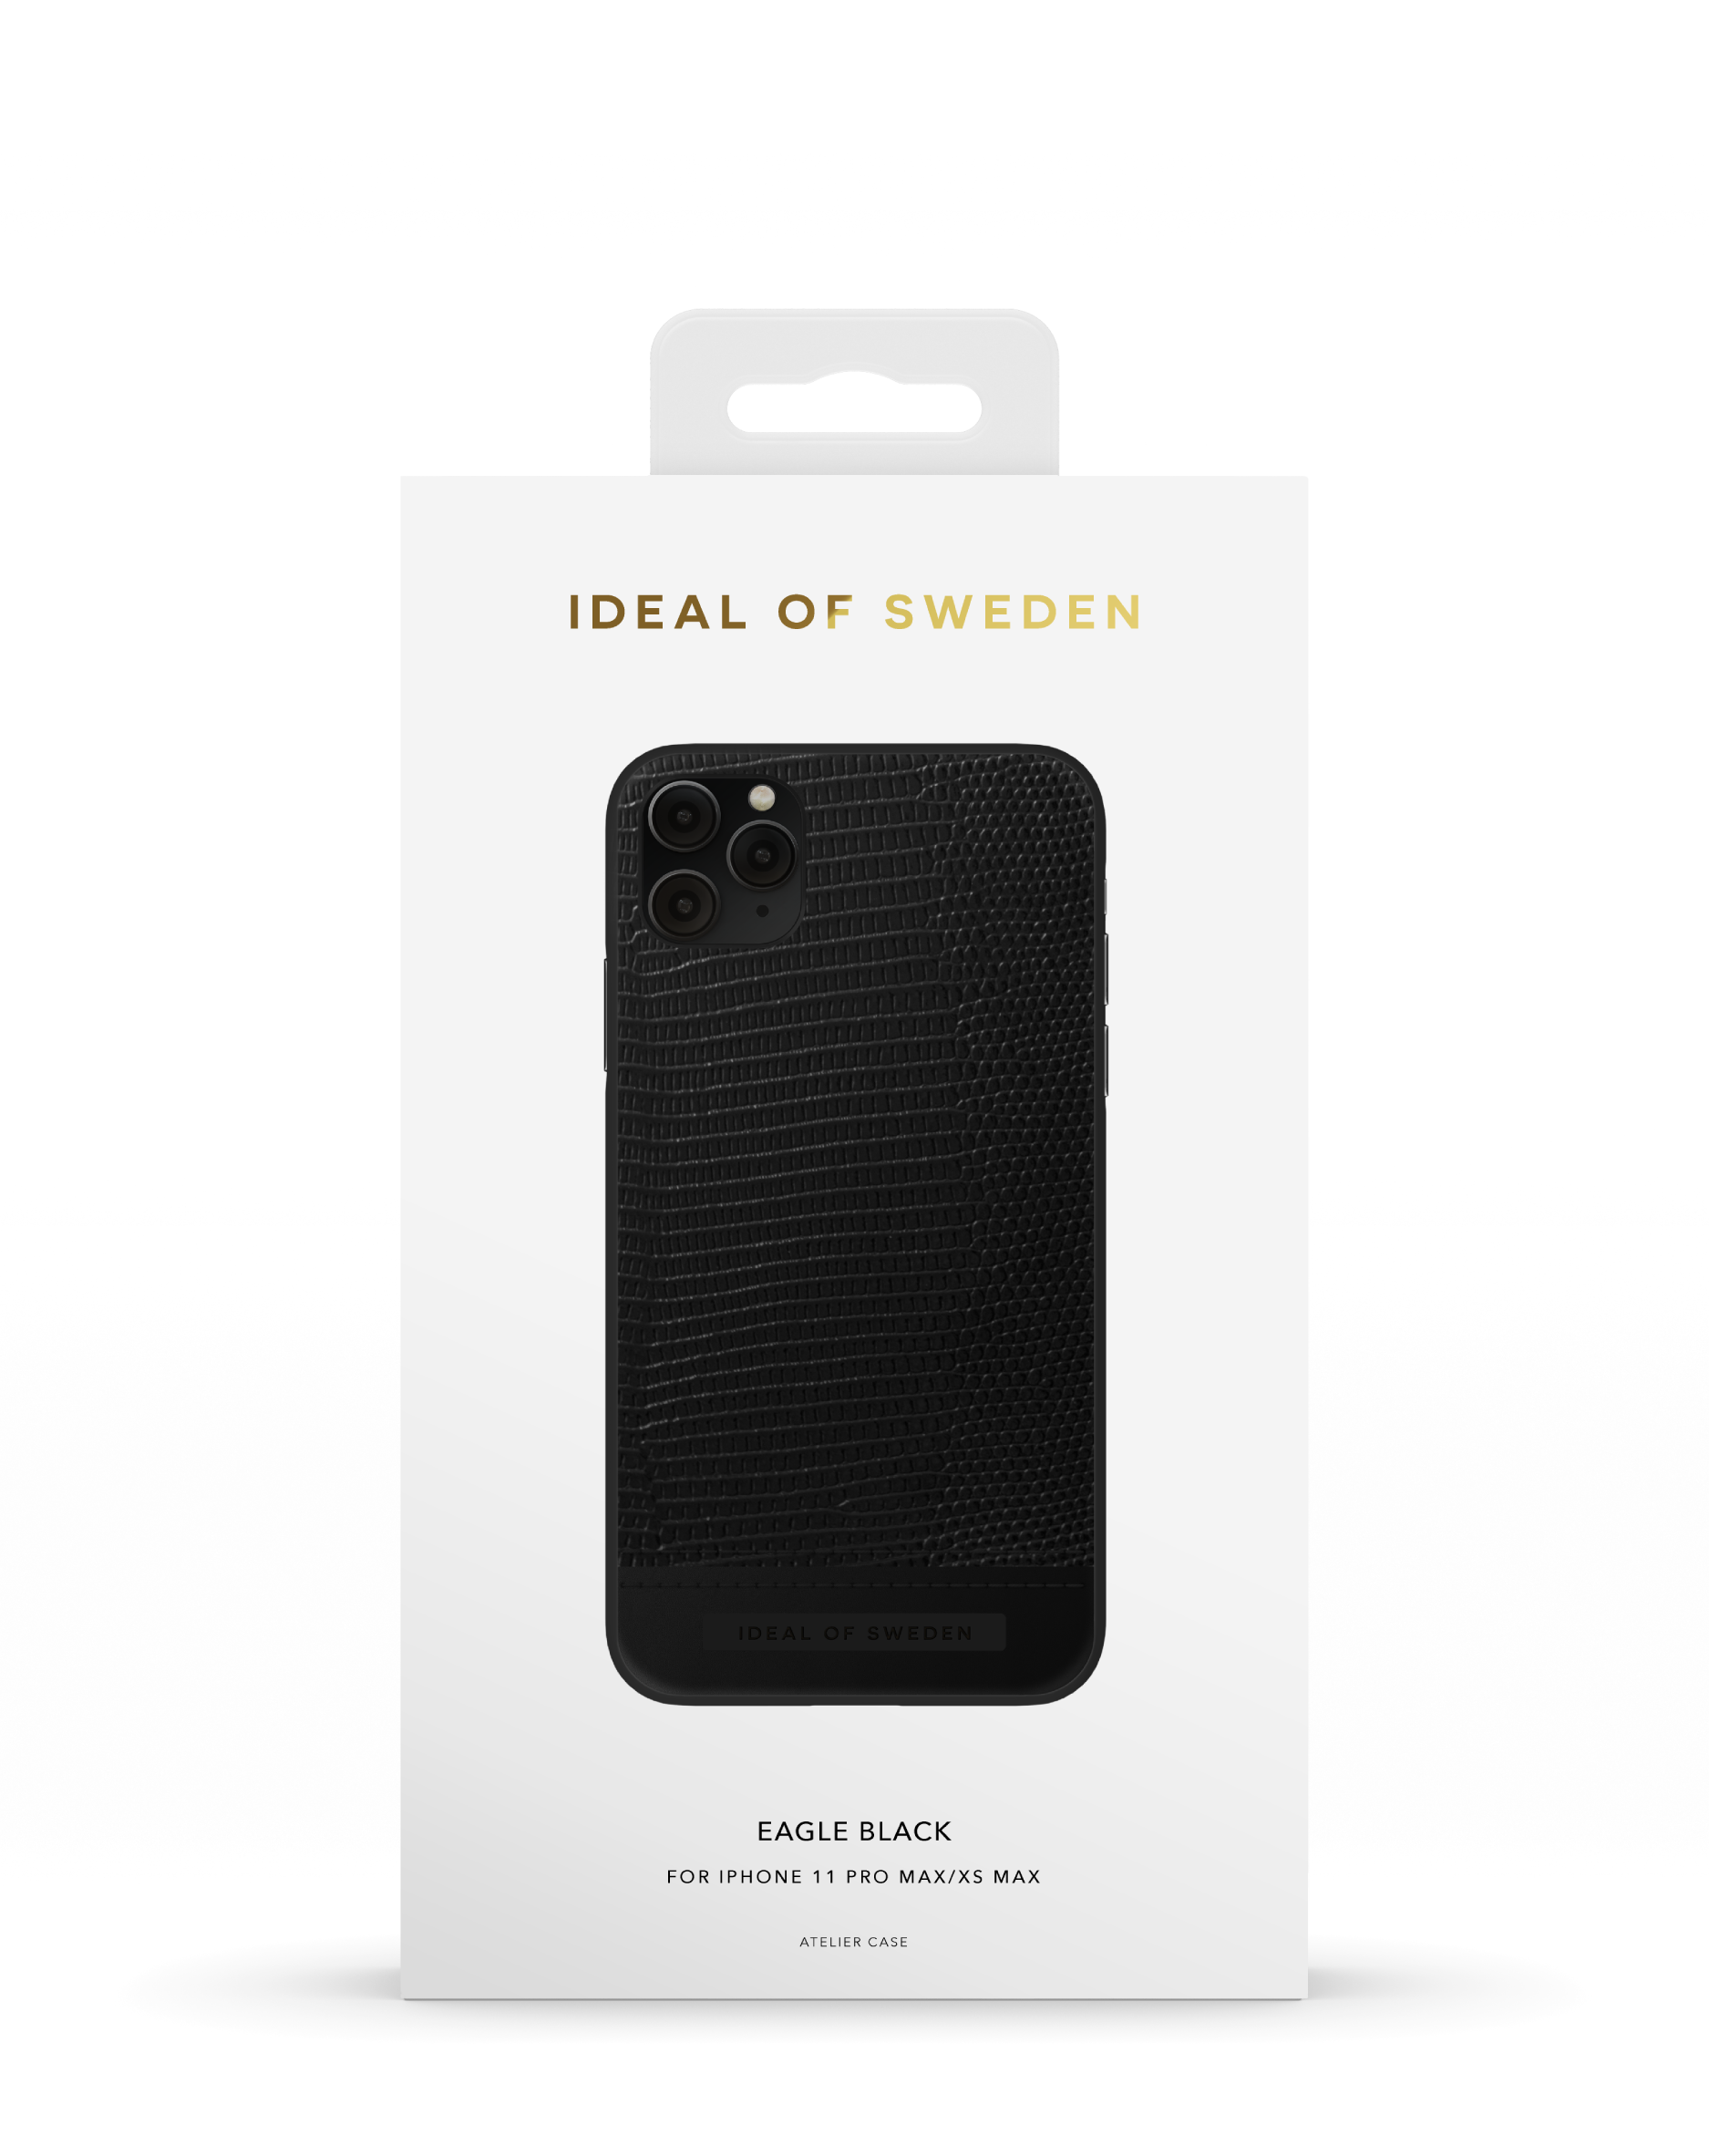 Apple IDEAL Apple, Apple Max, Max, Backcover, 11 IDACAW20-1965-229, iPhone Eagle OF XS Black SWEDEN iPhone Pro